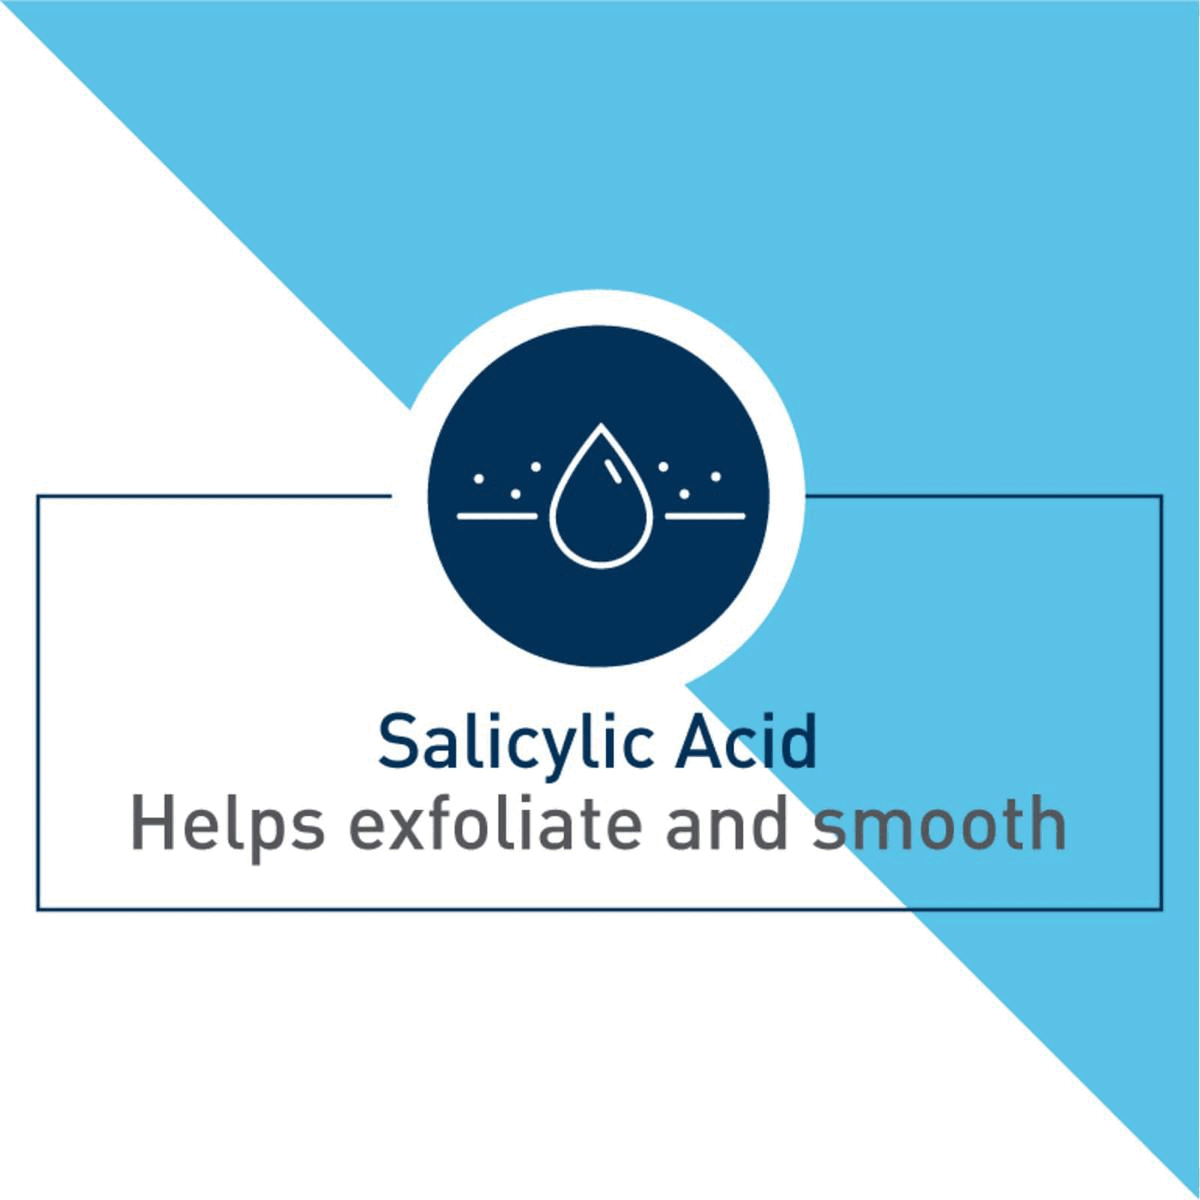 Image 1- salicylic acid helps exfoliate and smooth Image 2- gentle on skin suitable for sensitive skin Image 3- ceraVe developed with dermatologists